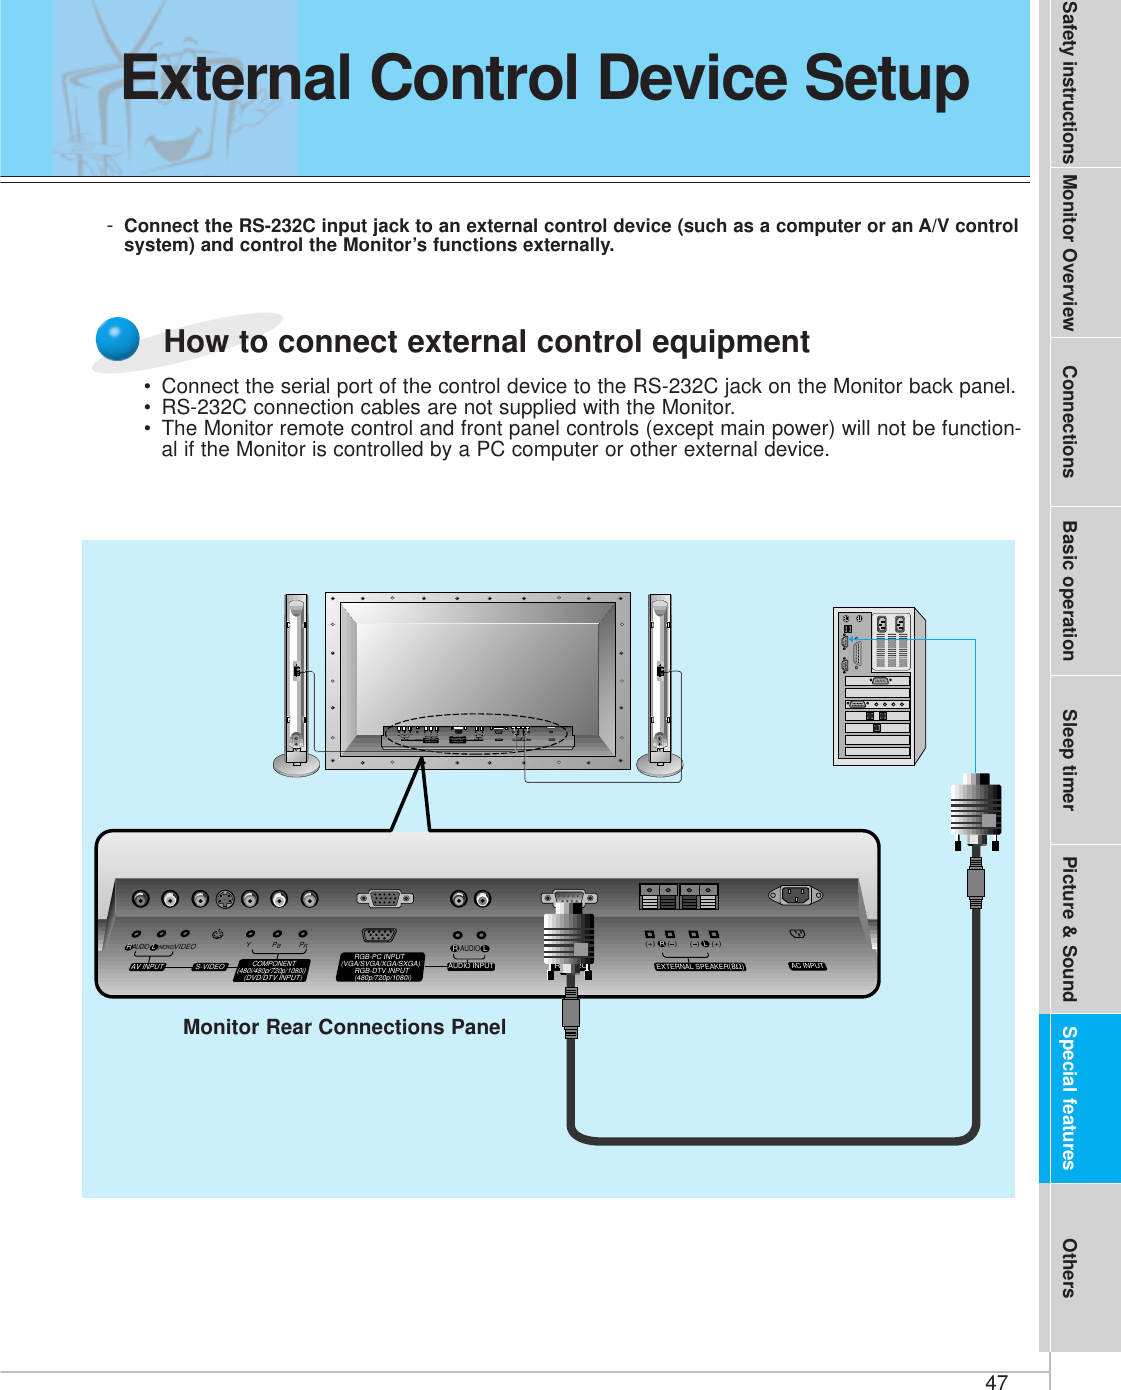 47Safety instructions Monitor Overview Connections Basic operation Sleep timer Picture &amp; Sound Special features Others-Connect the RS-232C input jack to an external control device (such as a computer or an A/V controlsystem) and control the Monitor’s functions externally.(+) (  ) (+)(  )AUDIO(MONO)RLVIDEO Y PBRPAV INPUTAUDIORL RLEXTERNAL SPEAKER (8Ω) AC INPUTAUDIO INPUTS-VIDEO COMPONENT(480i/480p/720p/1080i)RGB-PC INPUT(VGA/SVGA/XGA/SXGA)RGB-DTV INPUT(480p/720p/1080i)(DVD/DTV INPUT)(+) (  ) (+)(  )AUDIO(MONO)RLAV INPUT S-VIDEOCOMPONENT(480i/480p/720p/1080i)(DVD/DTV INPUT)RGB-PC INPUTAUDIO INPUTEXTERNAL SPEAKER(8Ω)RLAC INPUT(VGA/SVGA/XGA/SXGA)RGB-DTV INPUT(480p/720p/1080i)VIDEO YPBPRRS-232CRS-232CRLAUDIOMonitor Rear Connections Panel• Connect the serial port of the control device to the RS-232C jack on the Monitor back panel.• RS-232C connection cables are not supplied with the Monitor.• The Monitor remote control and front panel controls (except main power) will not be function-al if the Monitor is controlled by a PC computer or other external device.How to connect external control equipmentExternal Control Device Setup